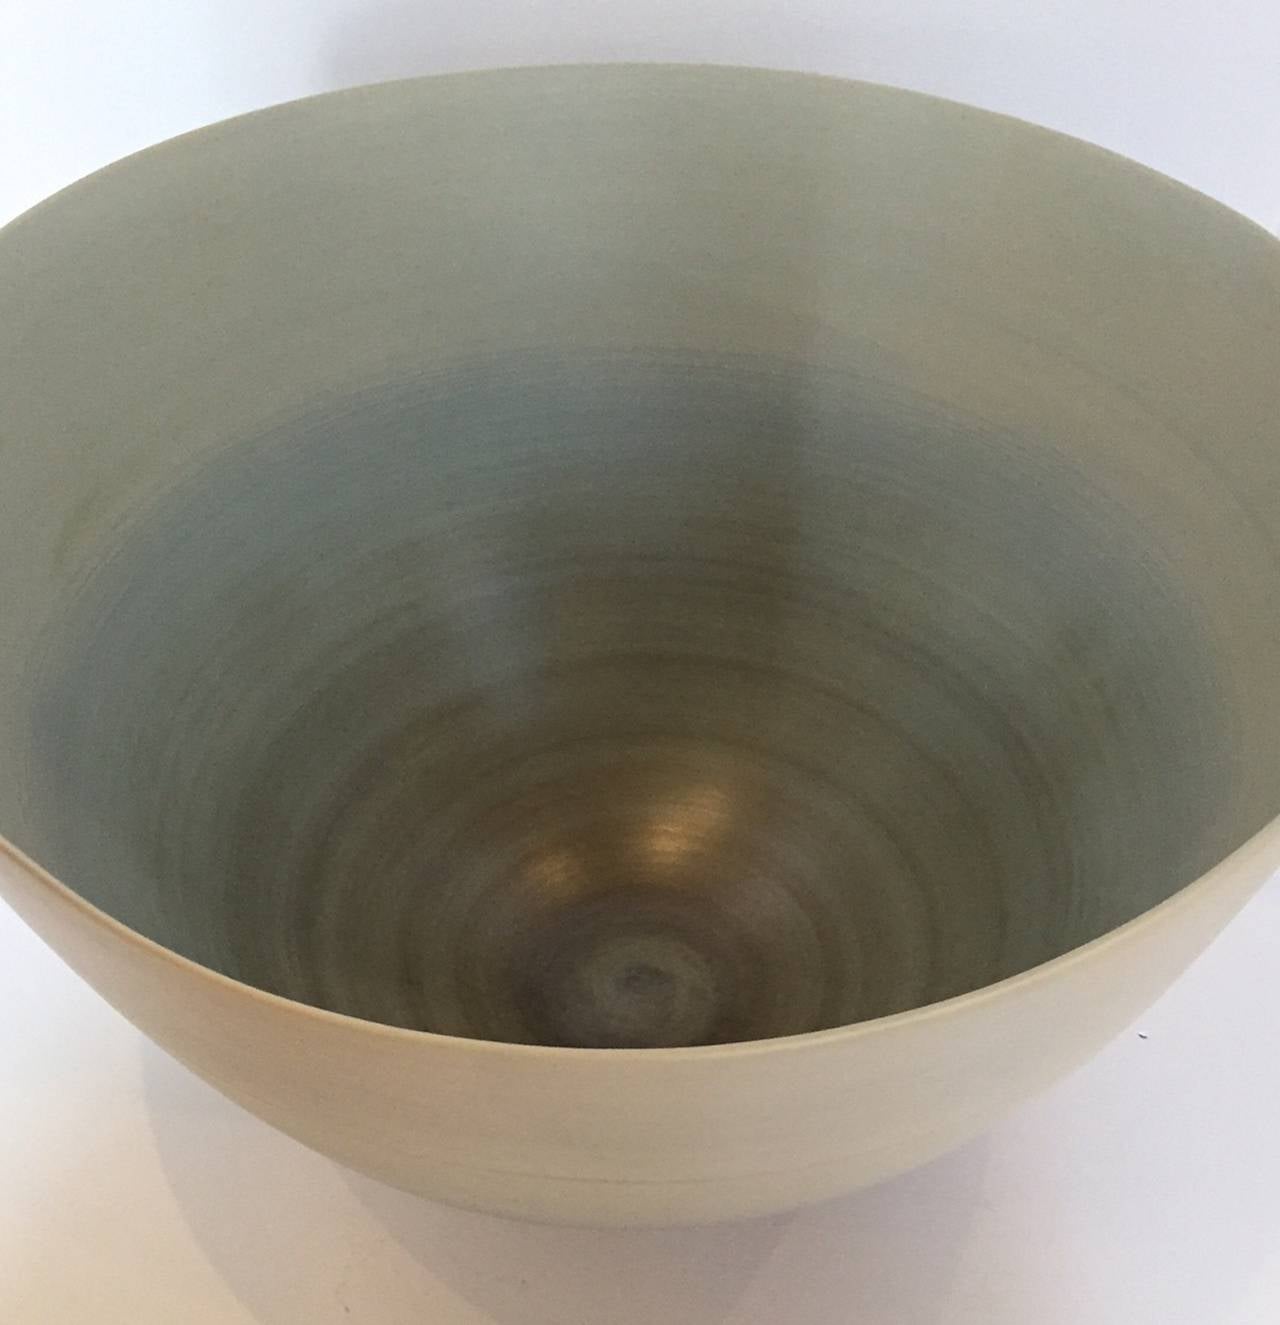 Contemporary Italian handmade deep bowl in a pale blue ombre design matte glaze.
This bowl is food safe.
We have a large collection of handmade unique, organically shaped bowls and platters in a variety of sizes, shapes and colors.
All are priced